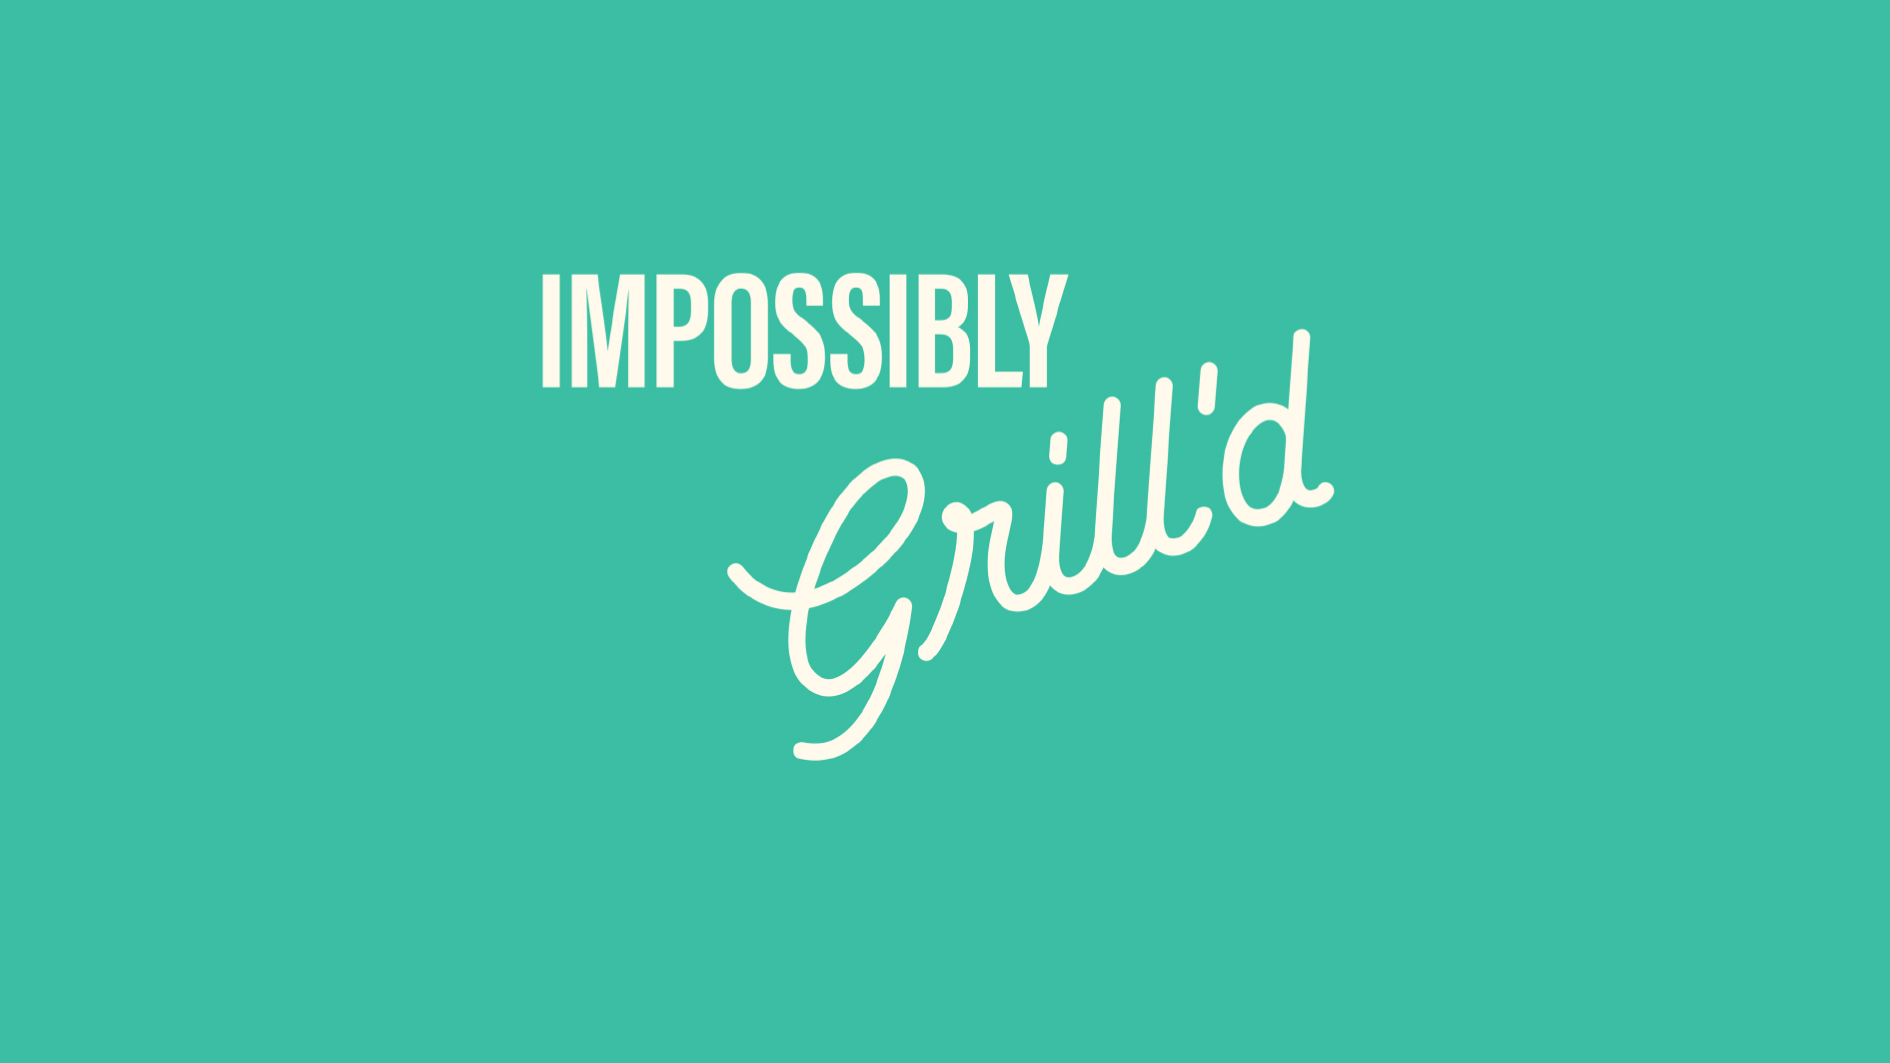 Grilld Goes Green